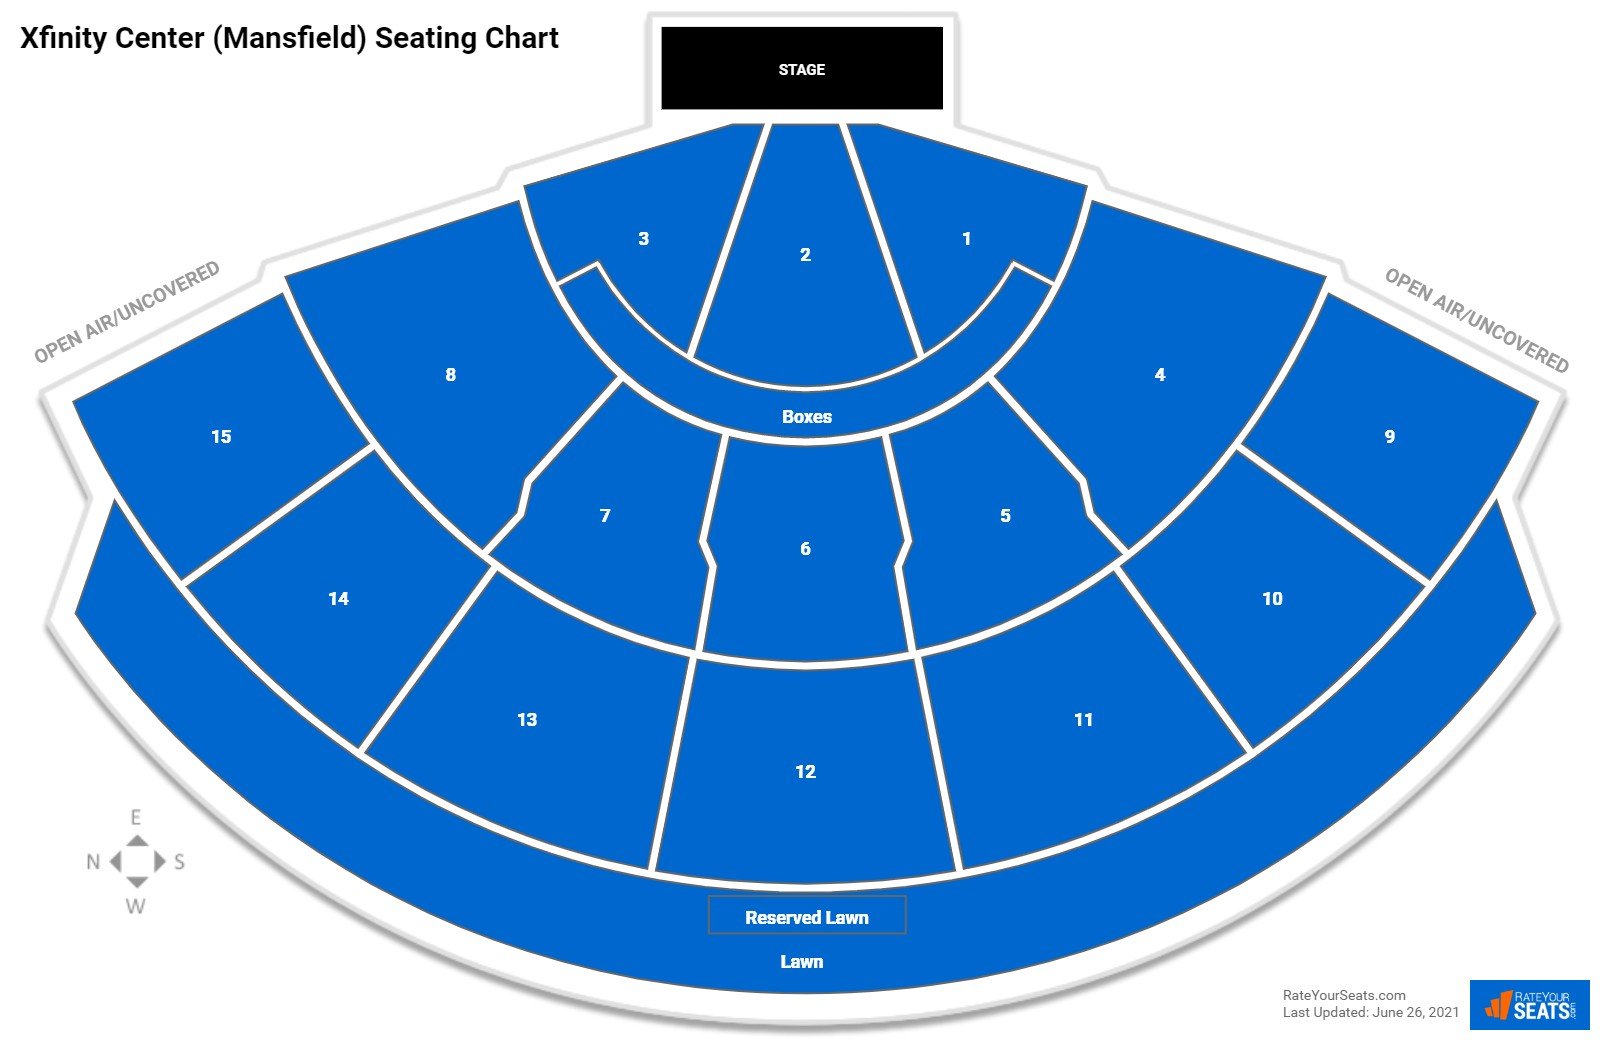 Xfinity Center (Mansfield) Concert Seating Chart